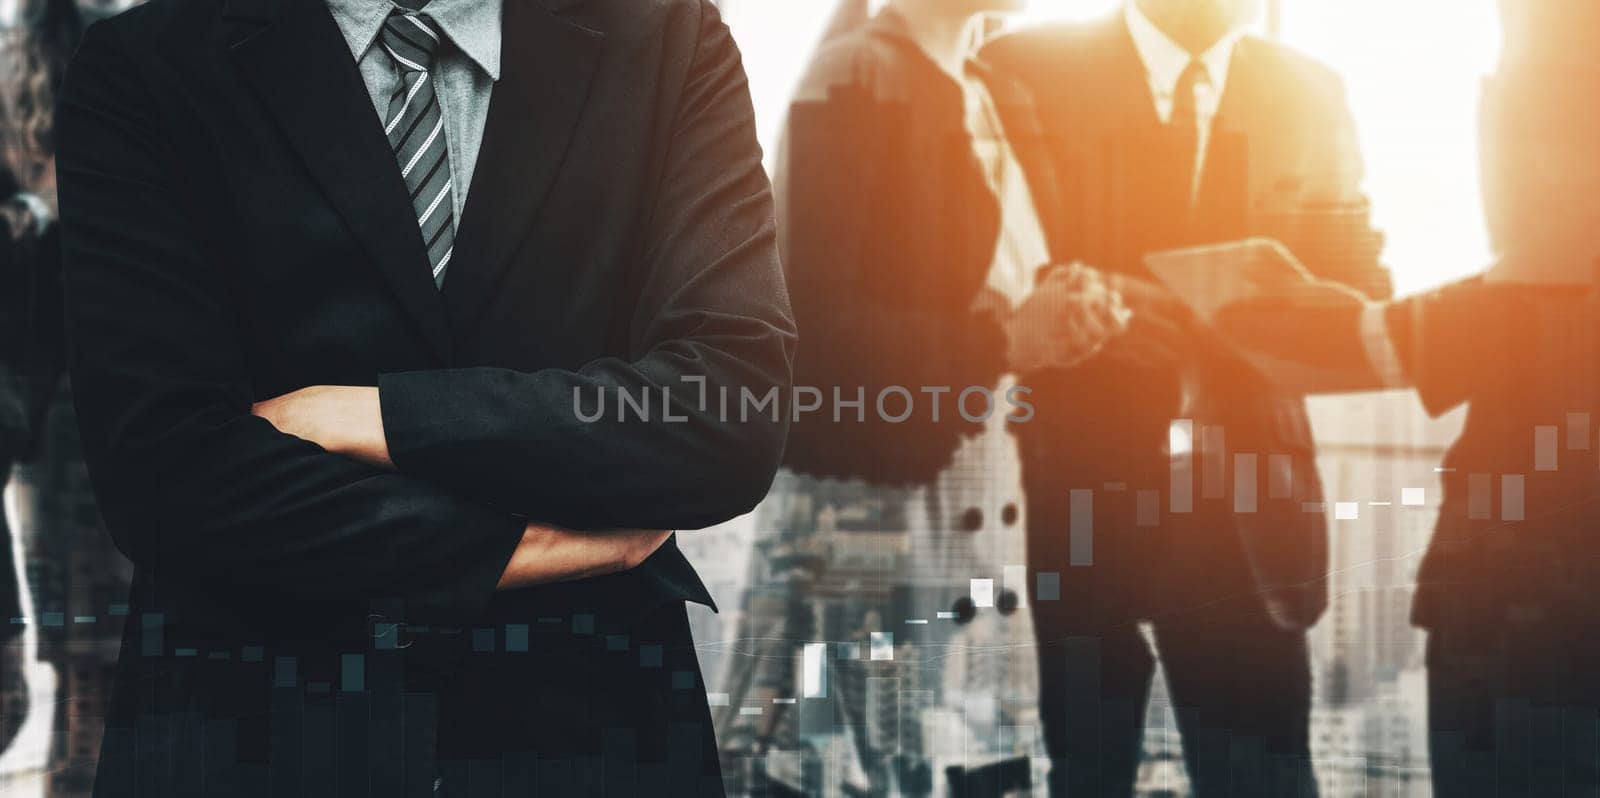 Business people group standing together with city office building background double exposure. Modern corporate job and human resources recruiting concept.